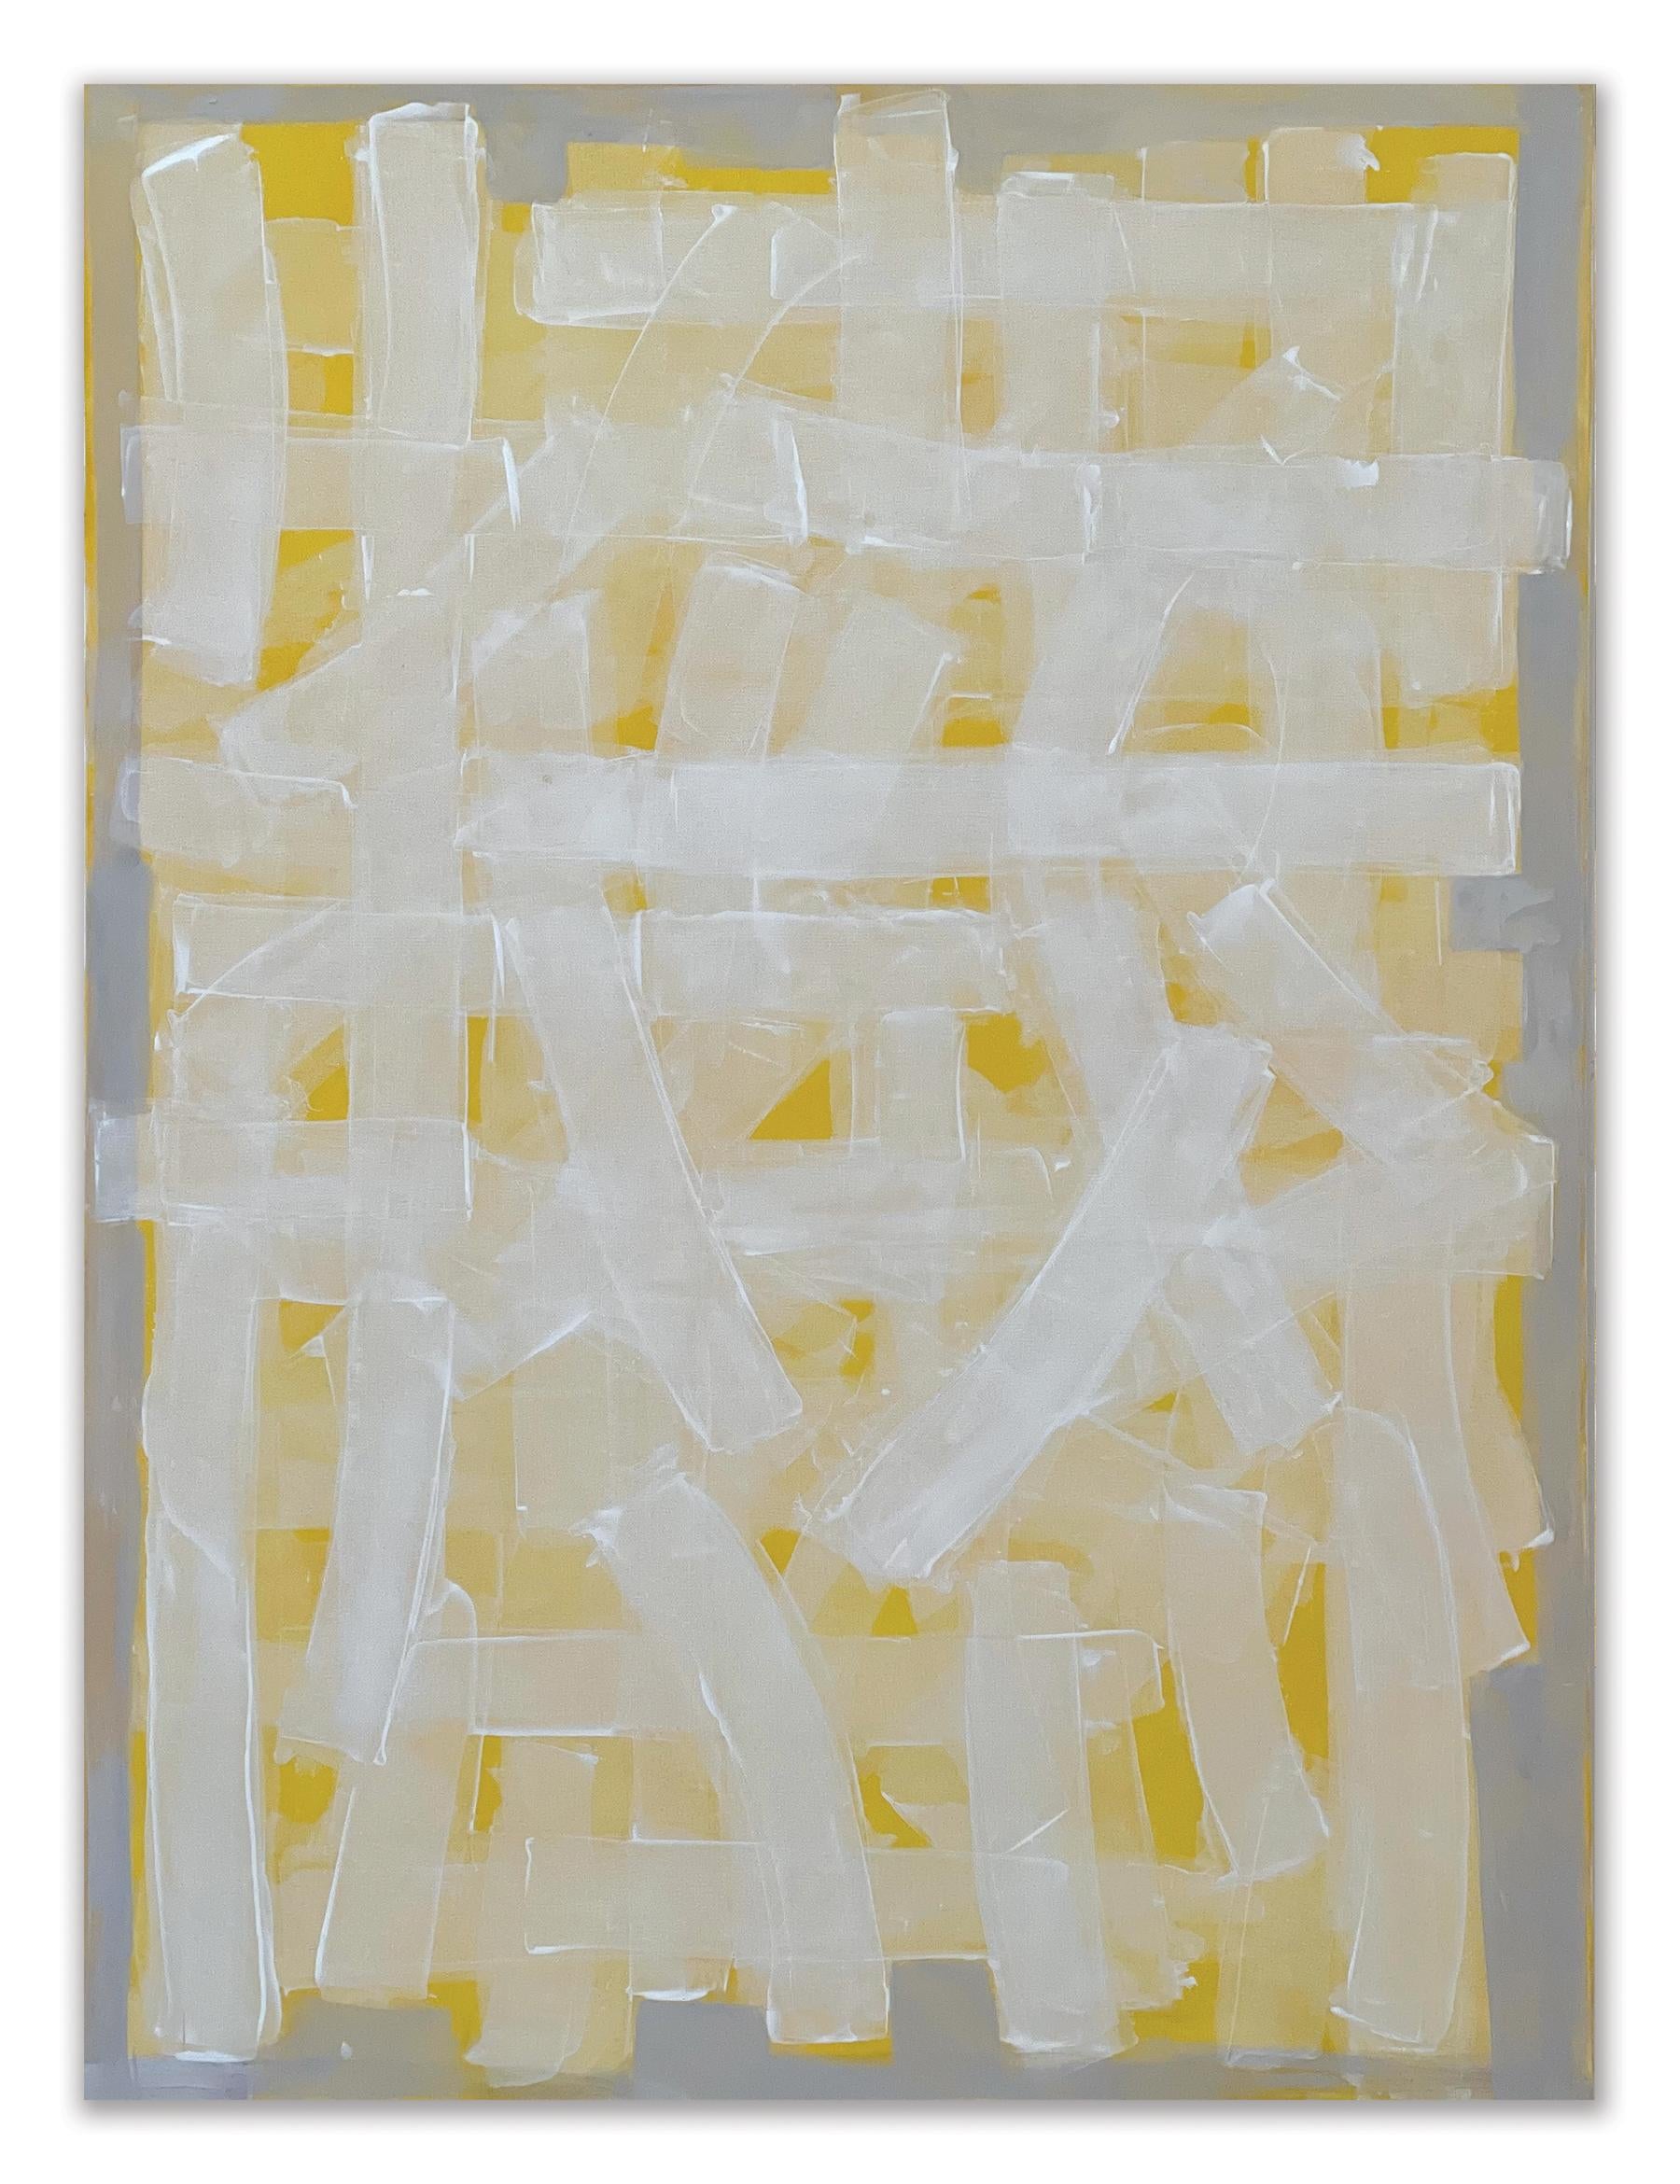 YeWgw, abstract minimalist painting on canvas, grey, white and yellow - Painting by Jane Ehrlich